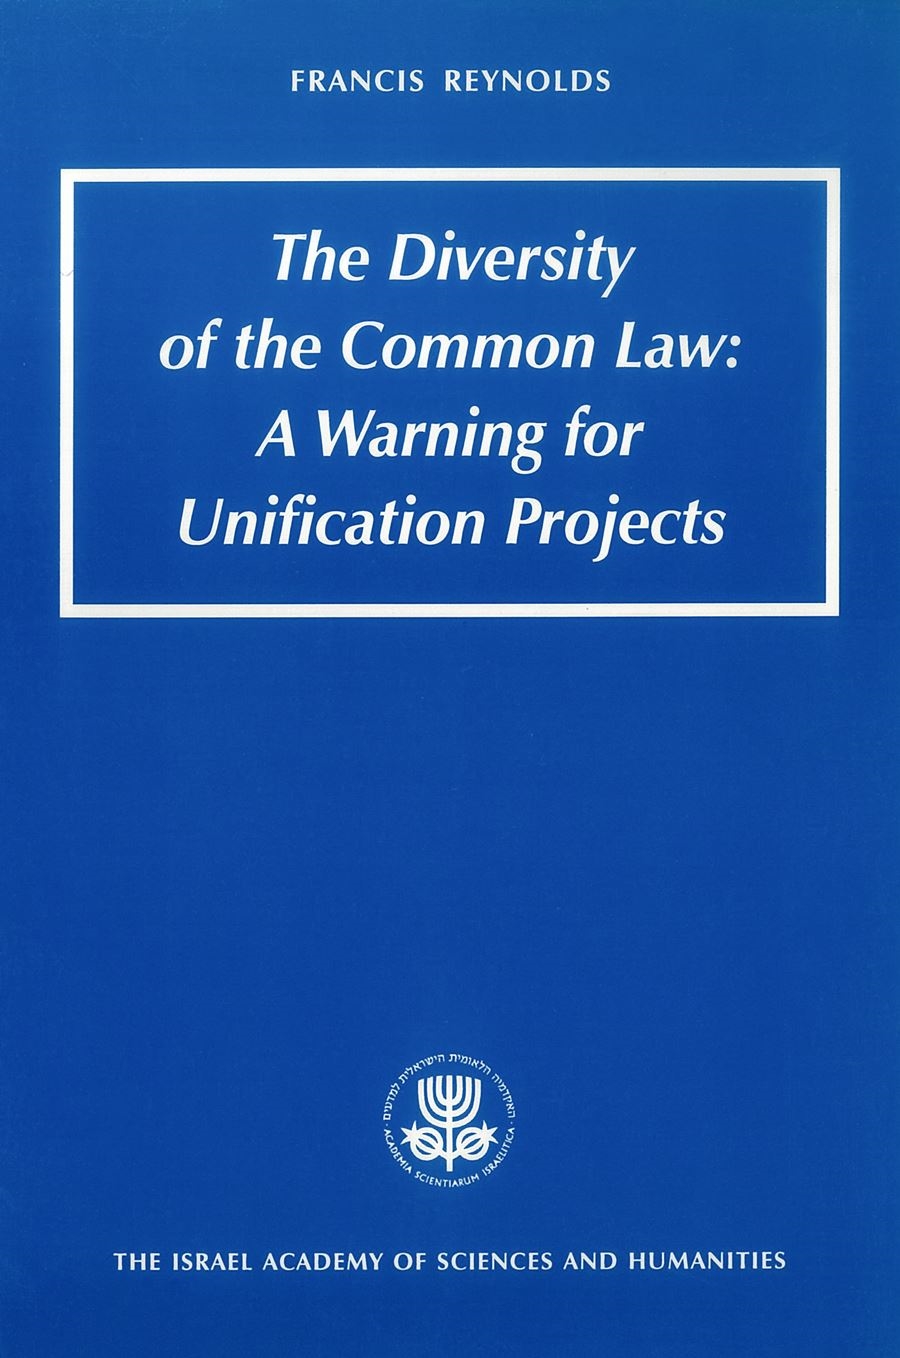 The Diversity of the Common Law: A Warning for Unification Projects